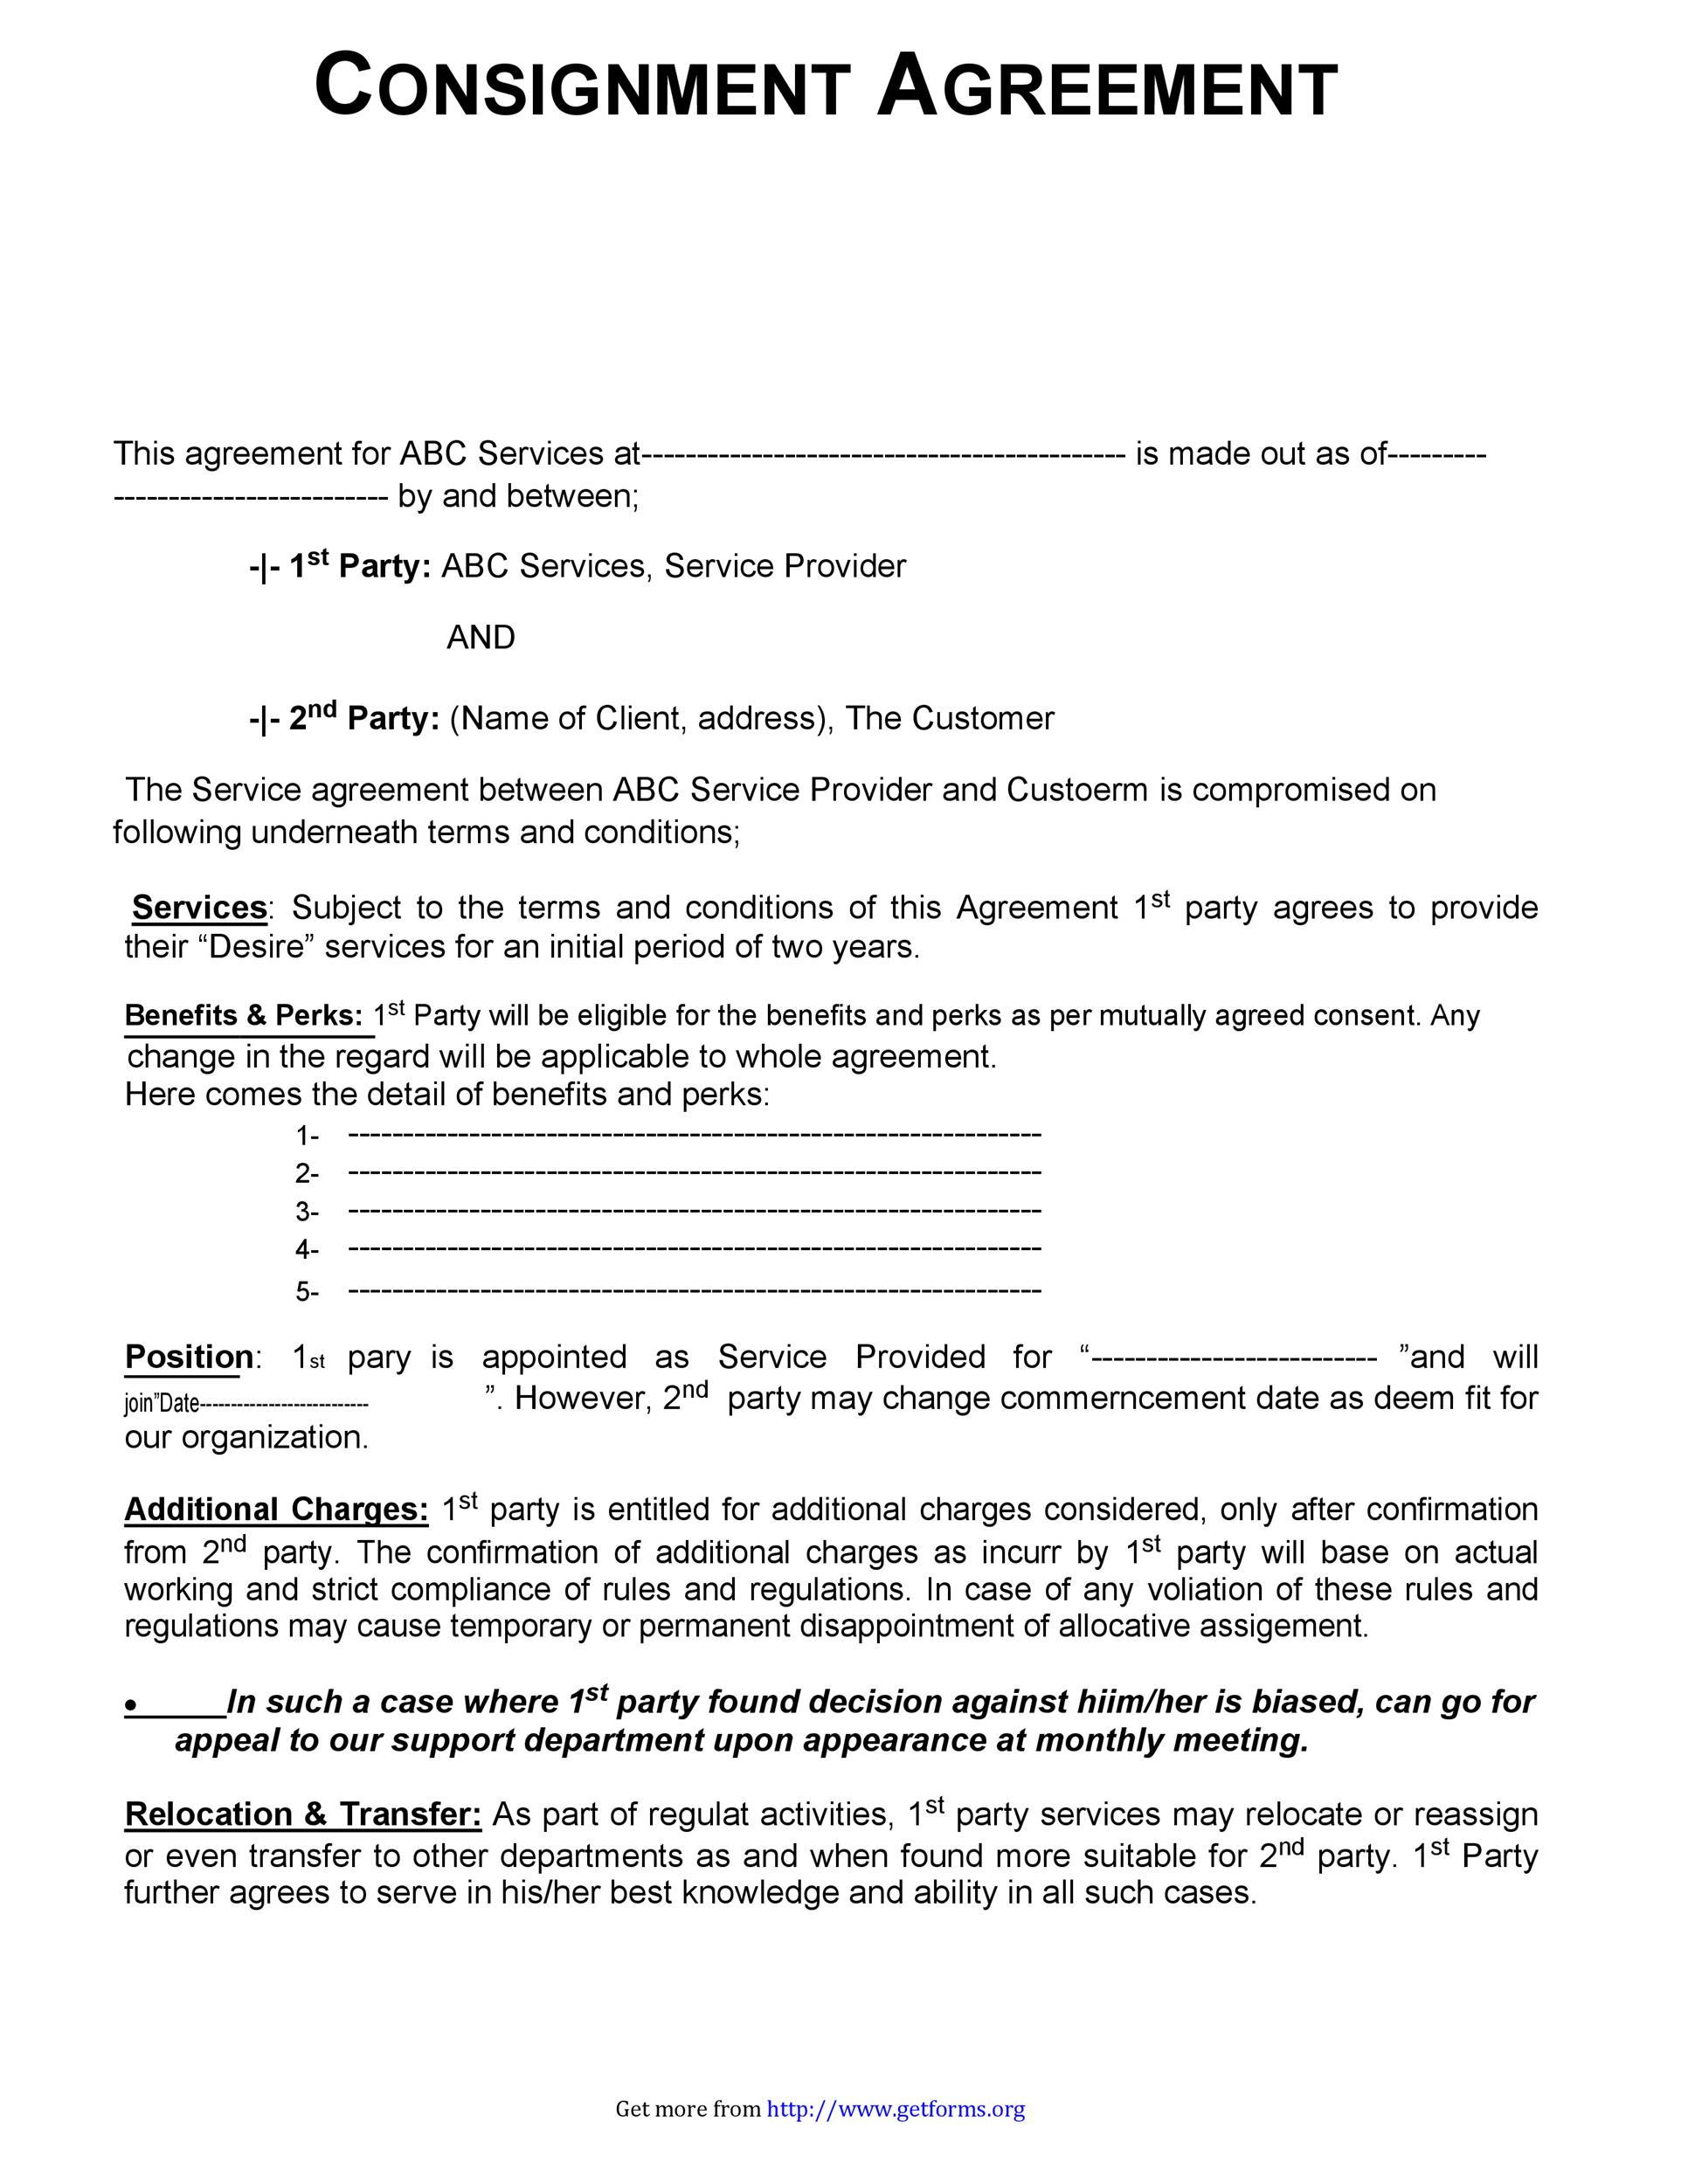 40  Best Consignment Agreement Templates Forms ᐅ TemplateLab